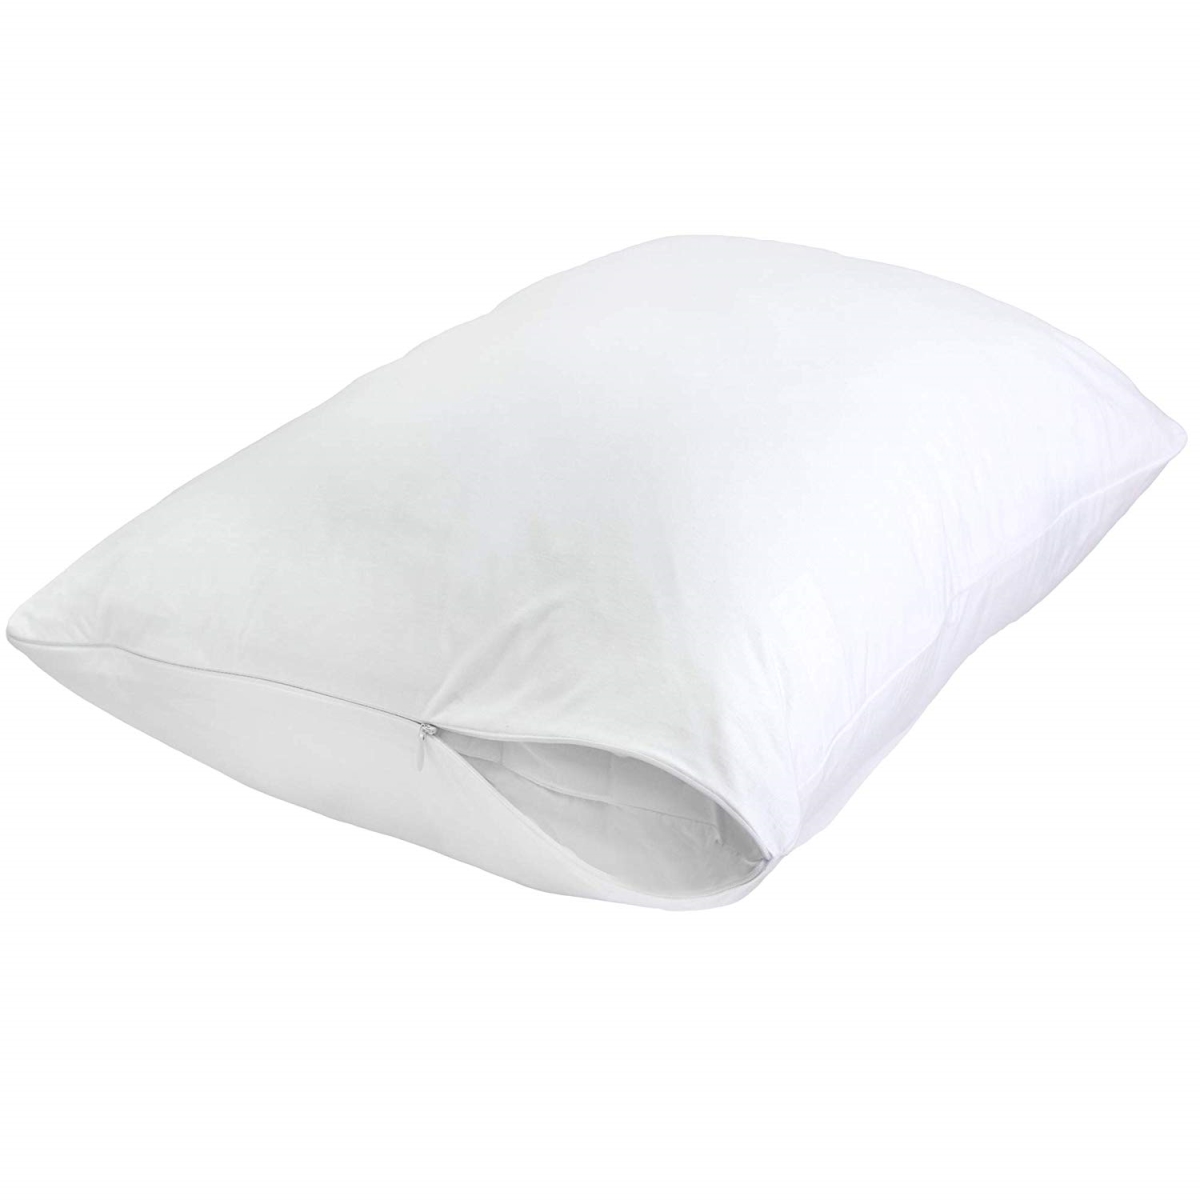 733362 Sleep Solutions By Waterproof Hypoallergenic Bamboo Pillow Protector, White - Standard Size